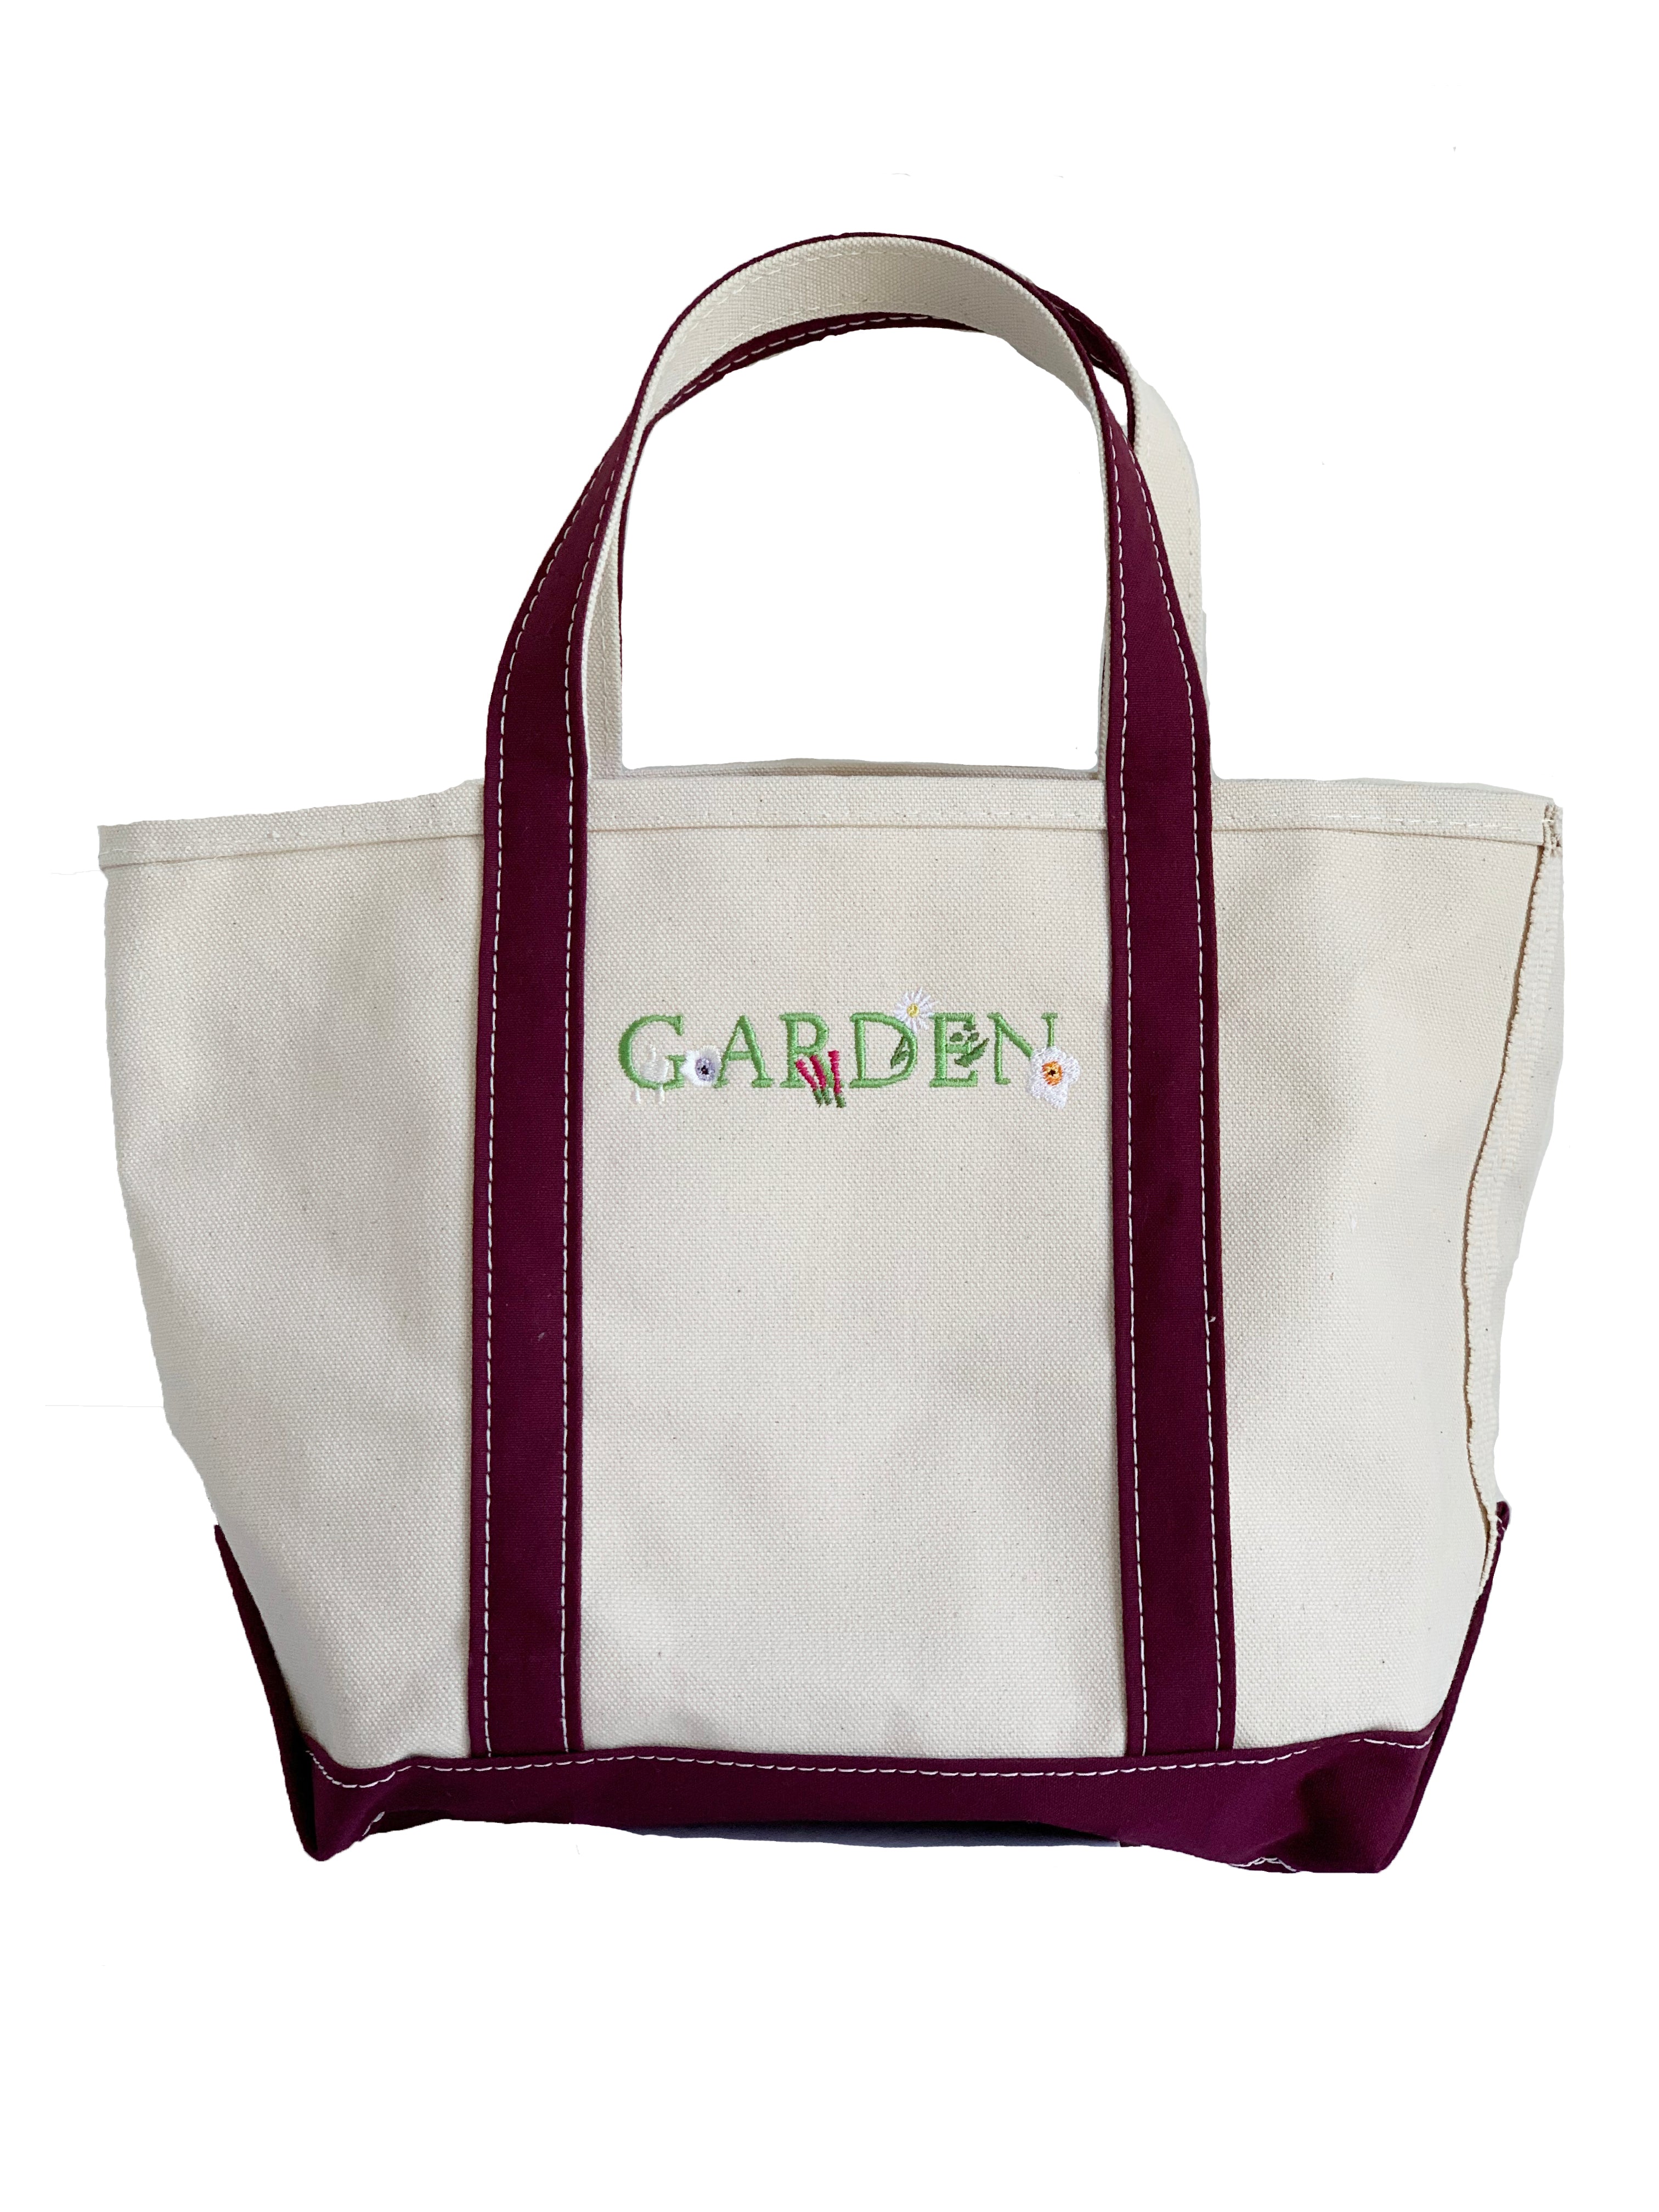 Customized, Embroidered Grocery Tote Bag